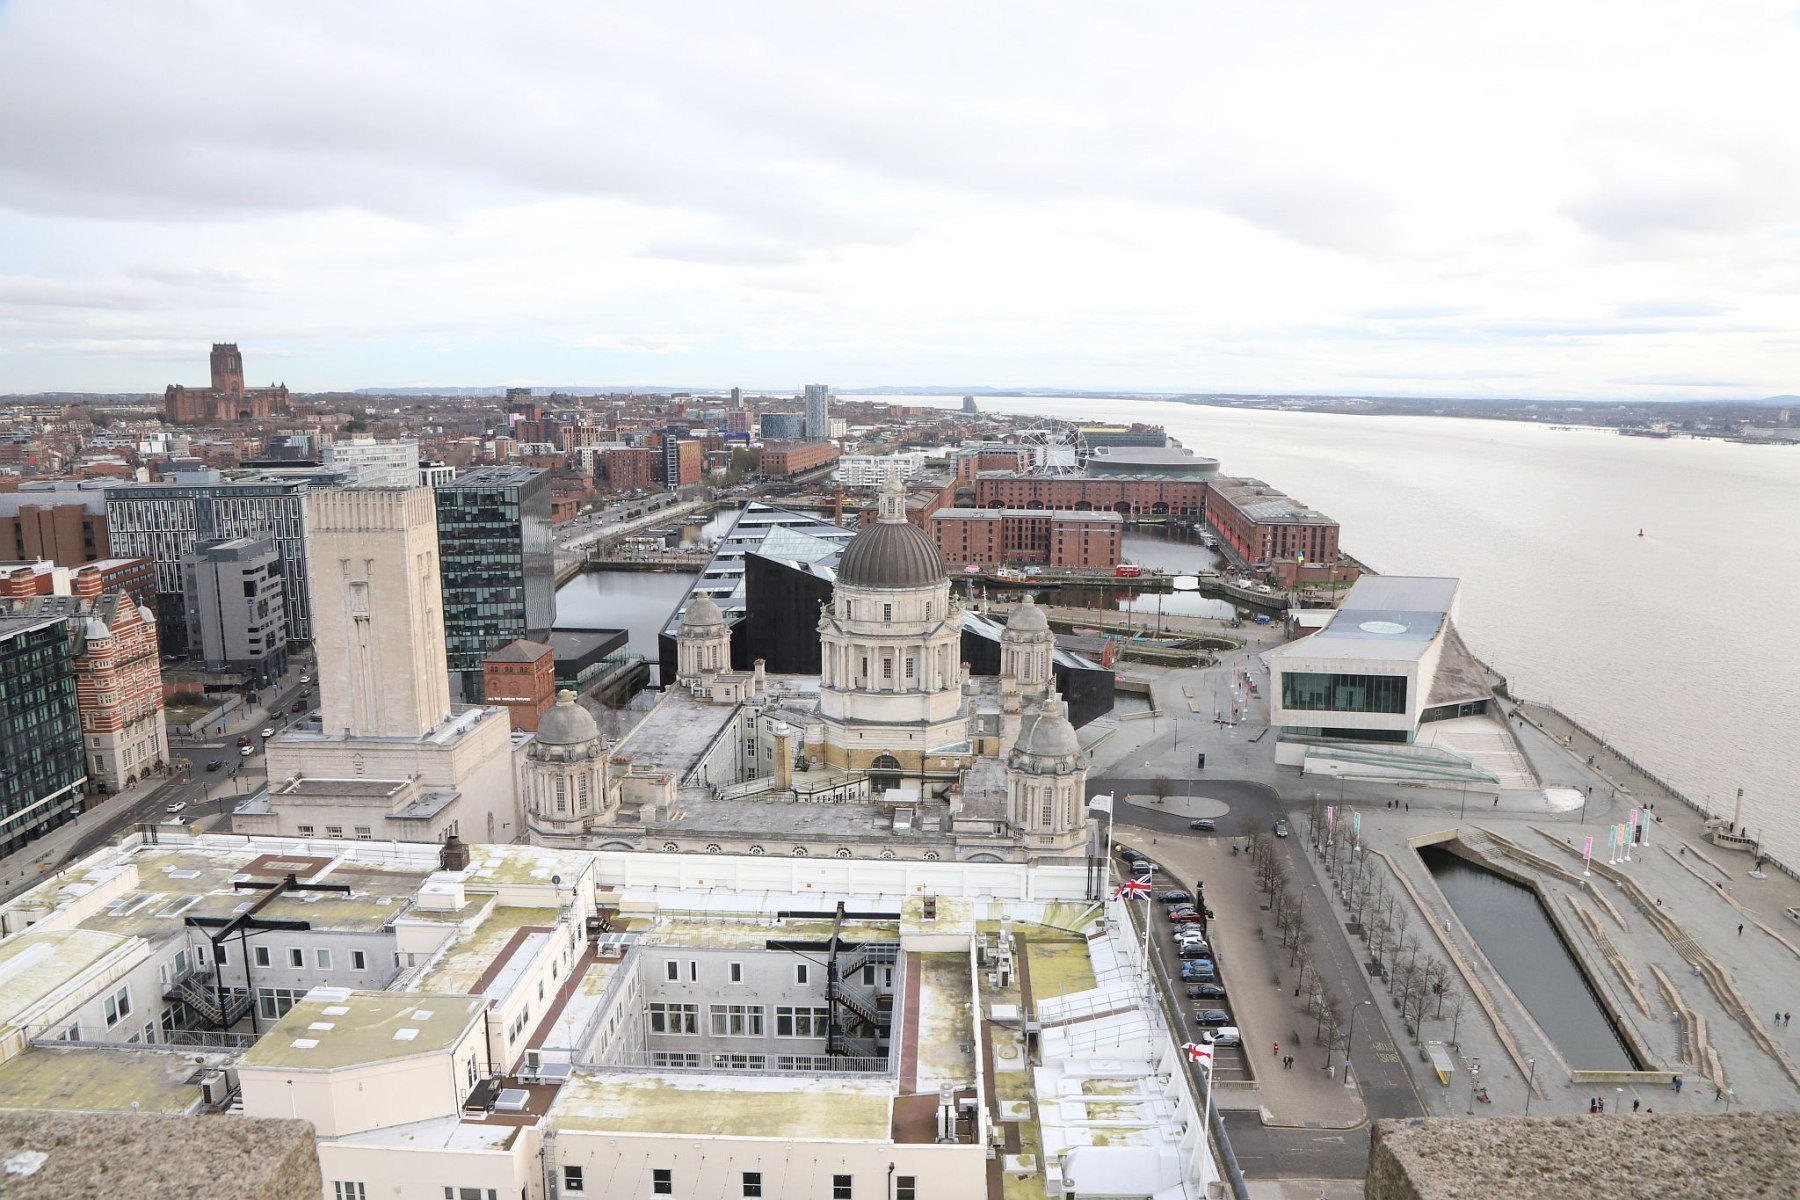 Royal Liver Building 360 Tower Tour looking down on the Liverpool waterfront and Pier Head. Liverpool Cathedral and the ventilation shaft for the Queensway Tunnel